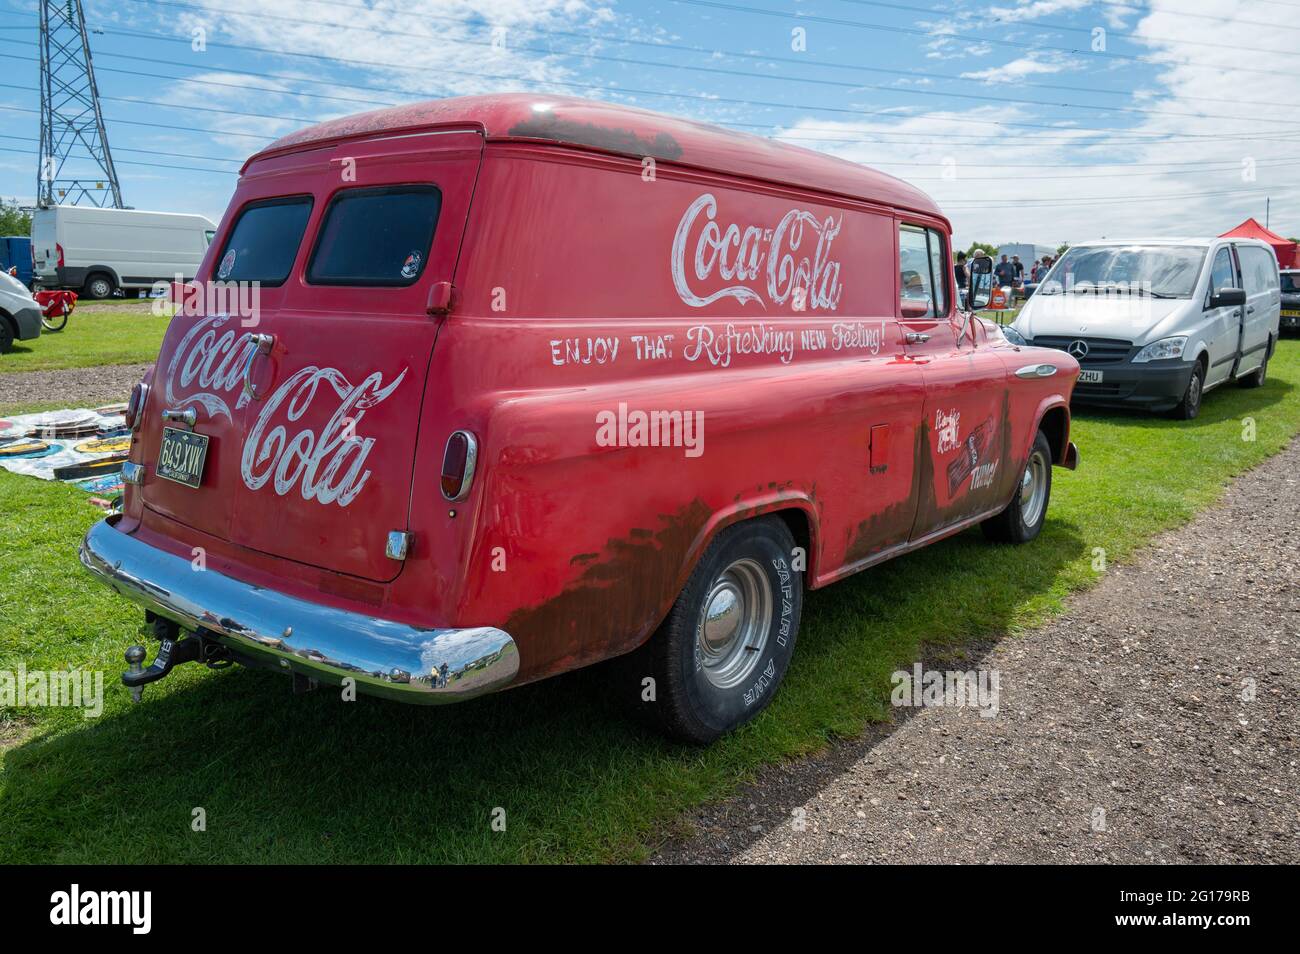 Large Chevrolet Coca-cola red van at a car show in norfolk Stock Photo